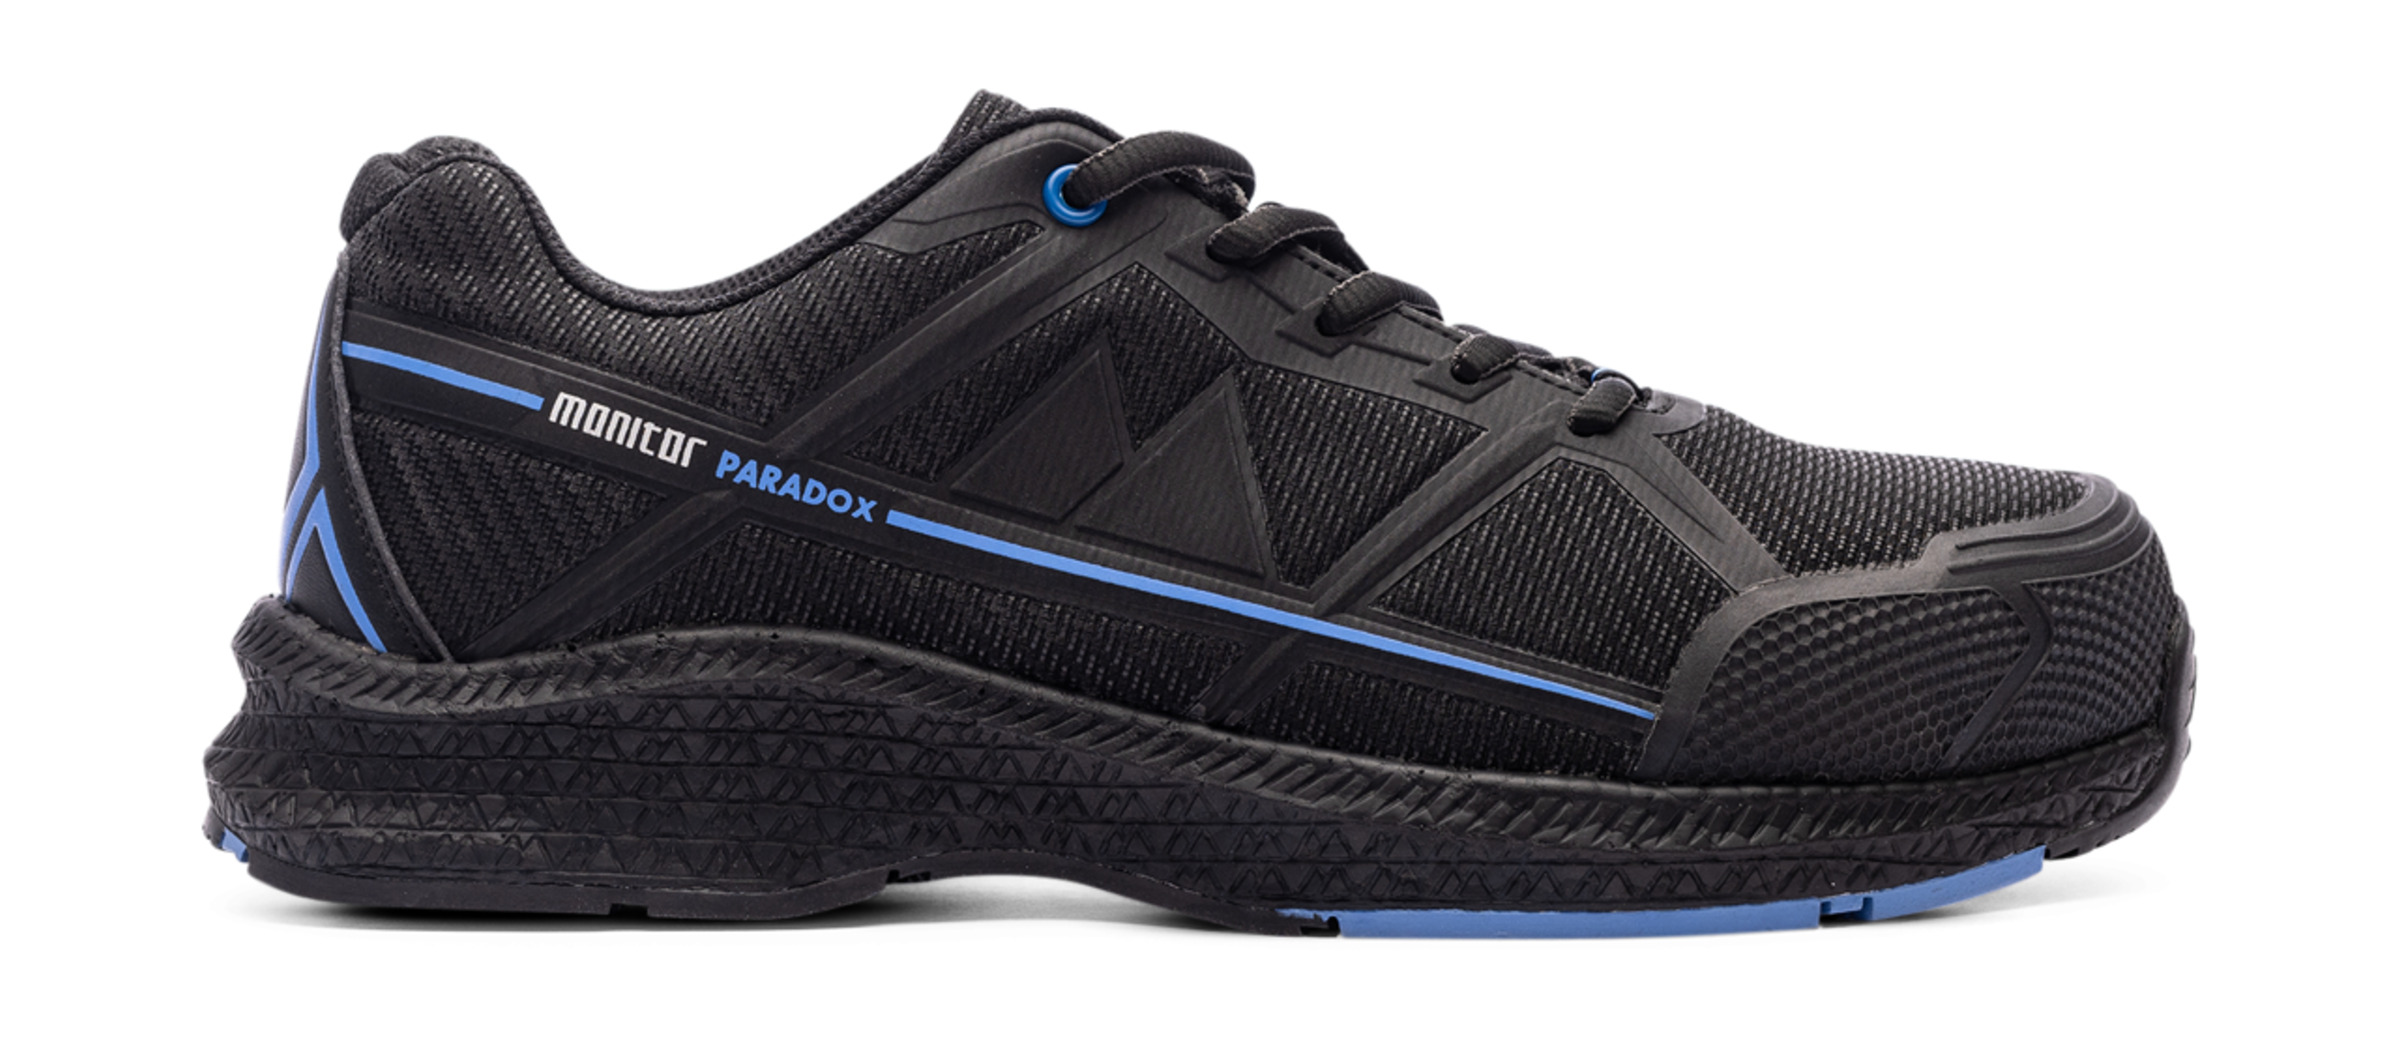 Monitor Paradox T Safety Shoe